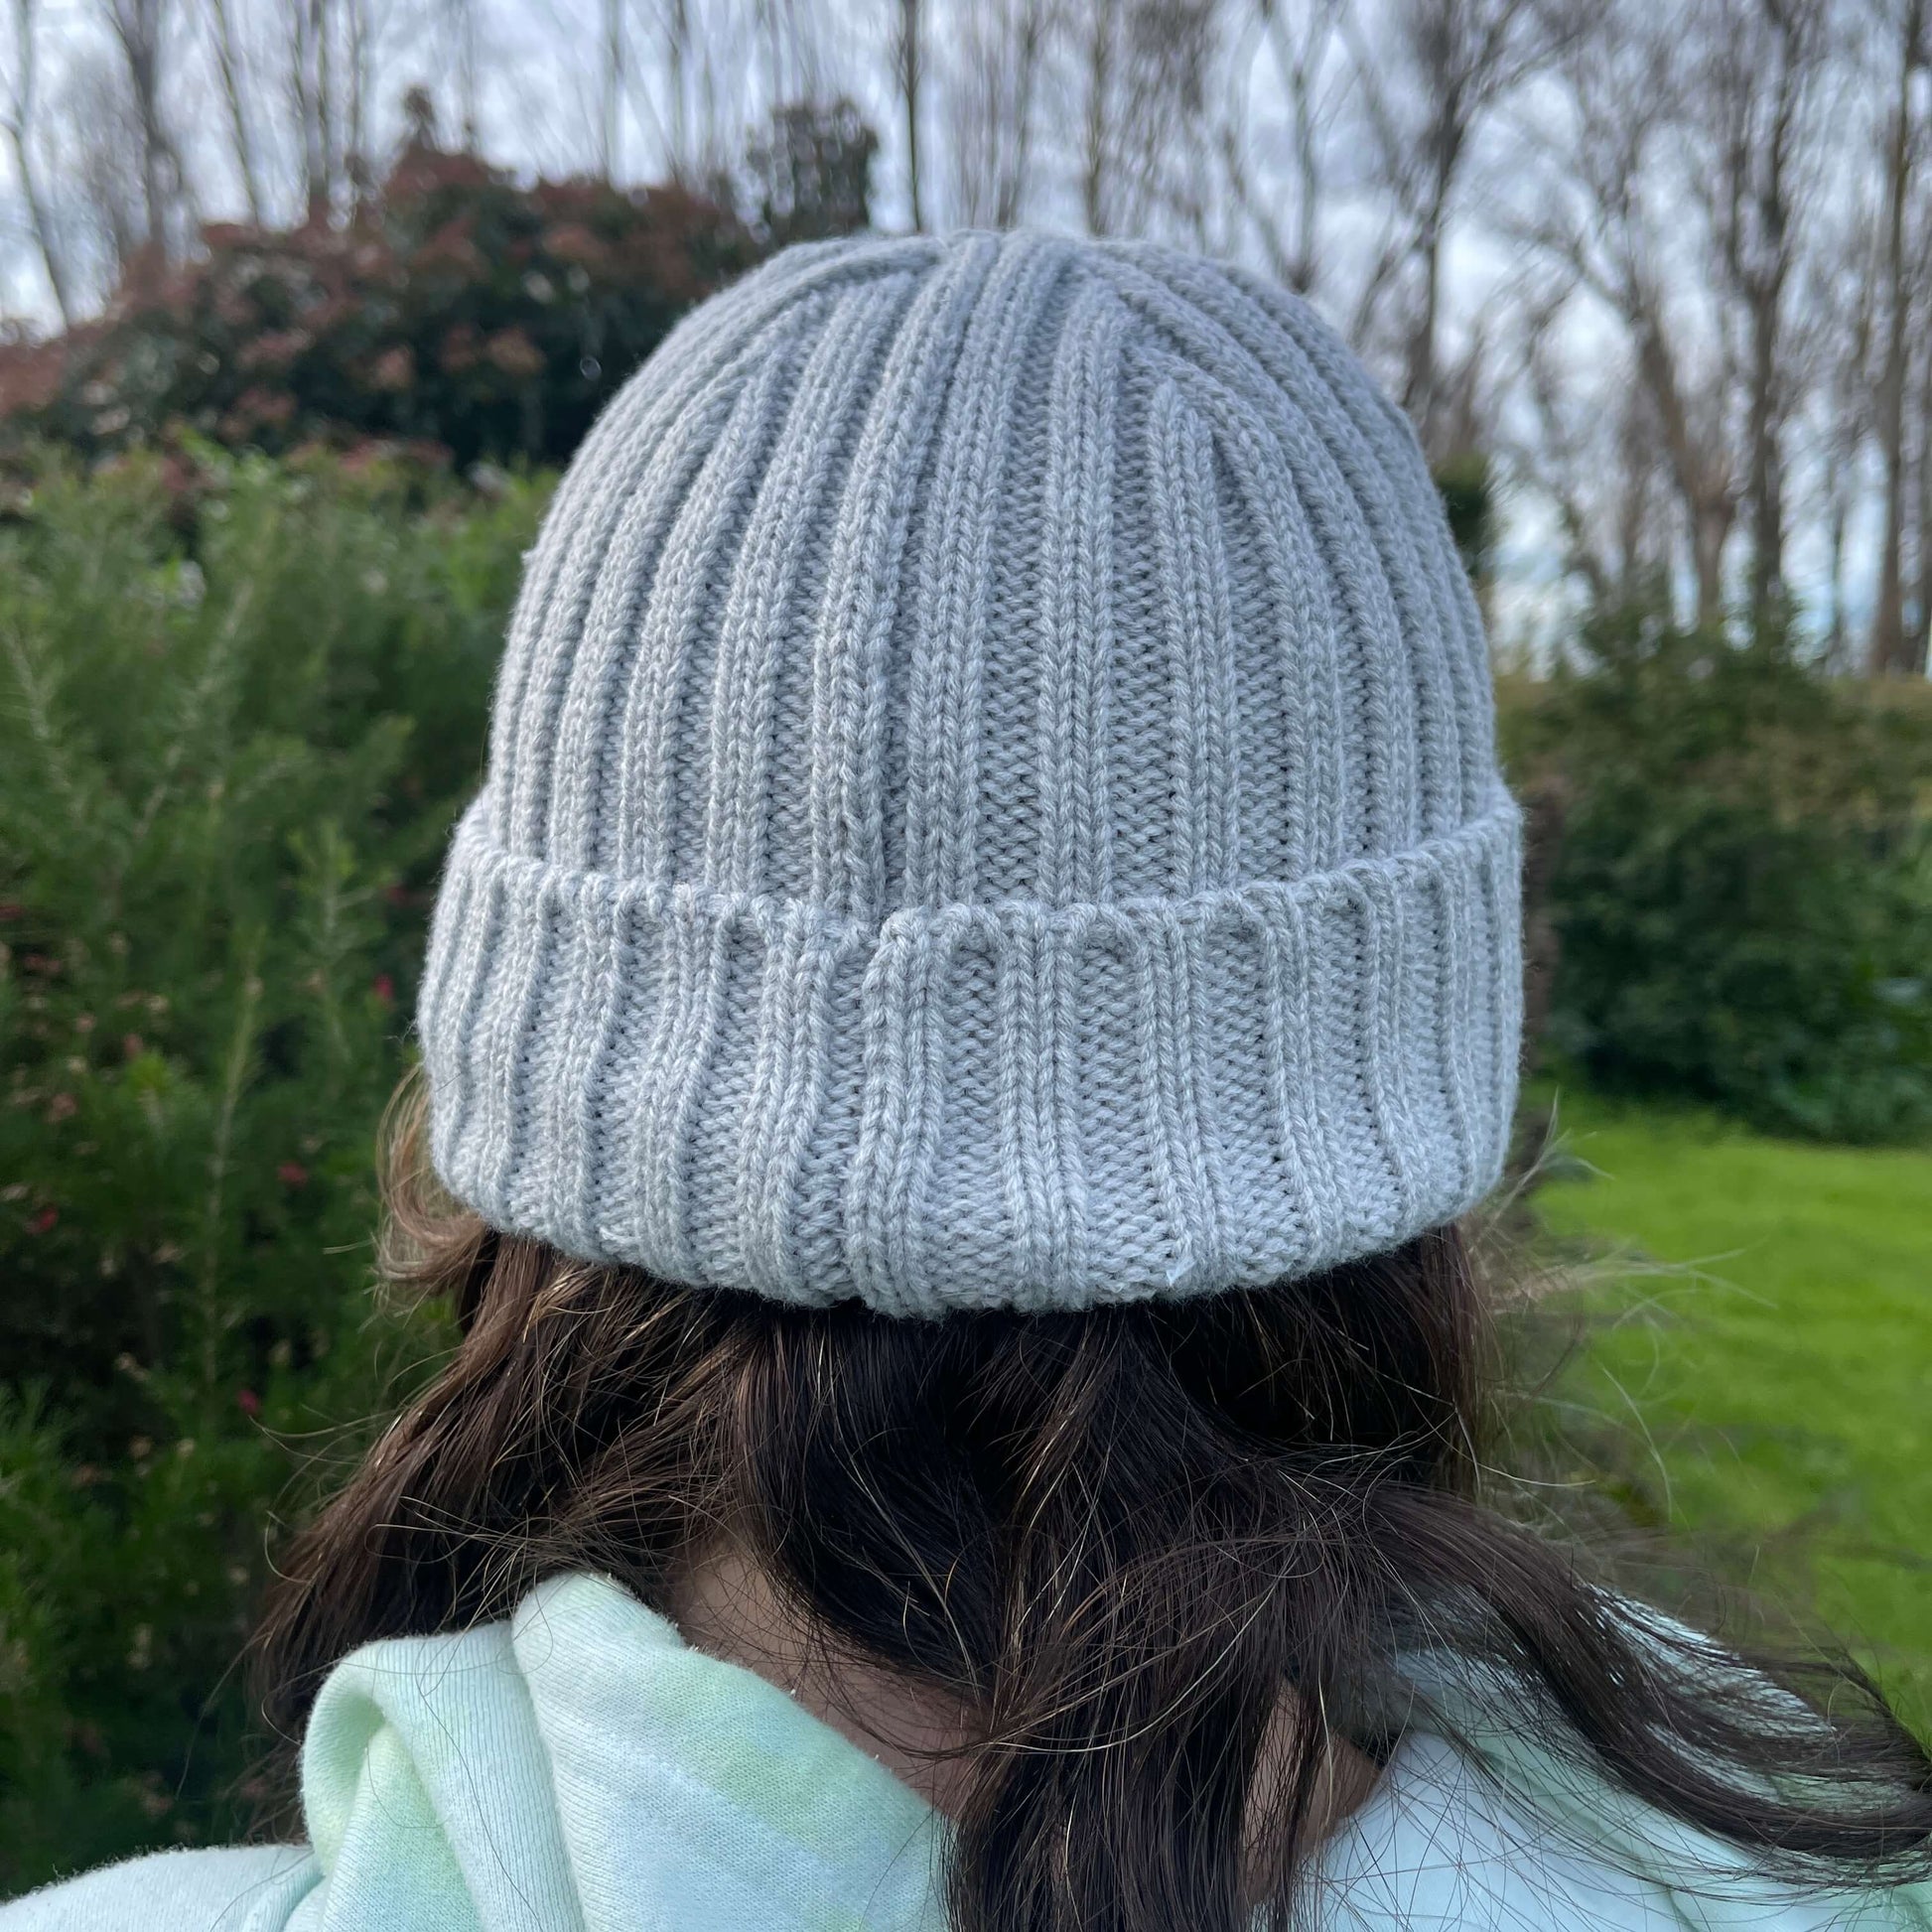 Child wearing grey knit beanie, back view.